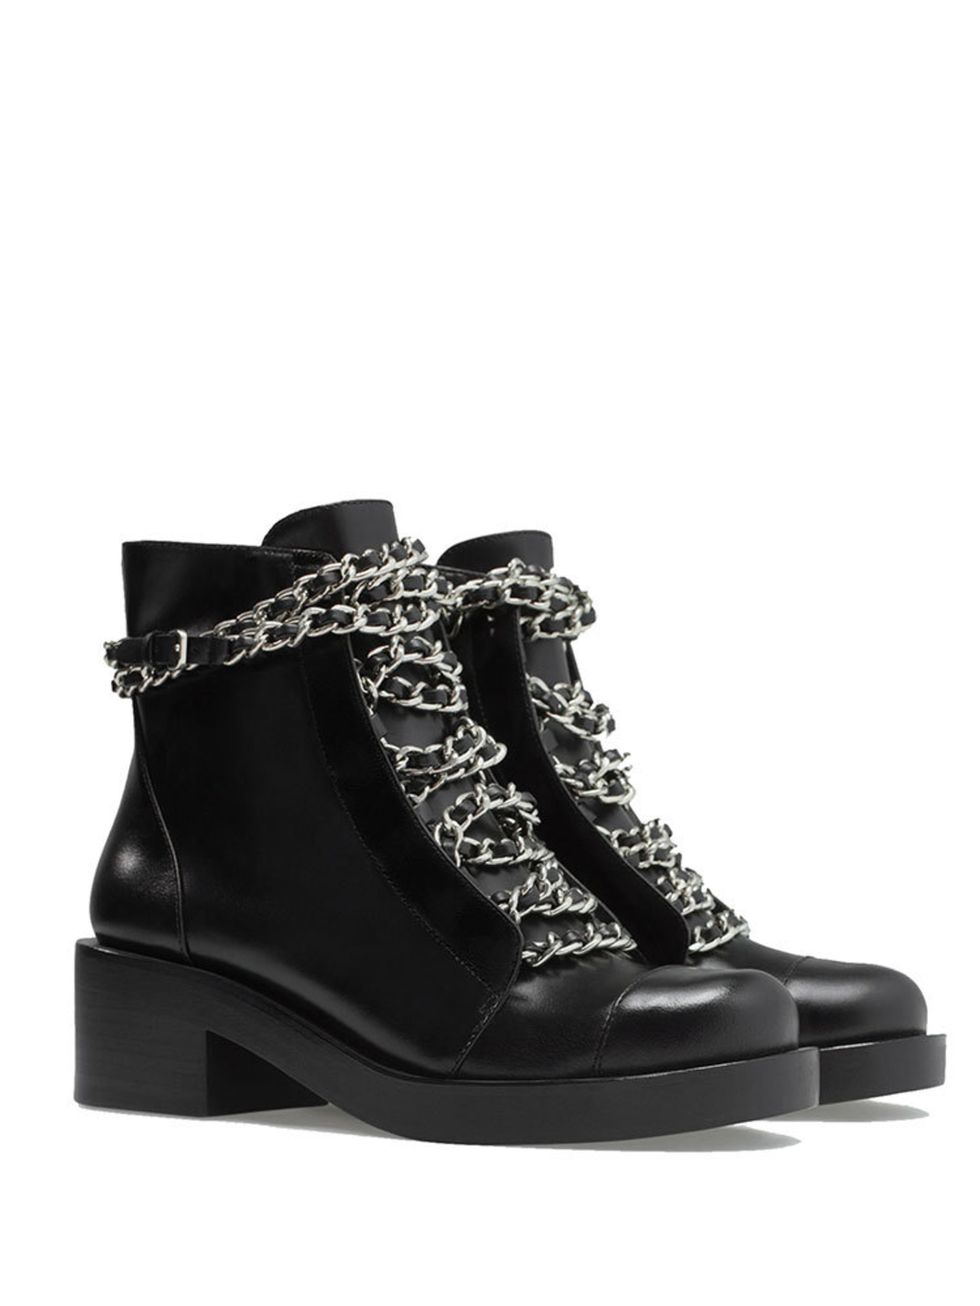 <p><a href="http://www.zara.com/uk/en/woman/shoes/ankle-boots/leather-lace-up-booties-with-chains-c288001p2072559.html">Zara</a> £89.99</p>

<p> </p>

<p> </p>

<p> </p>